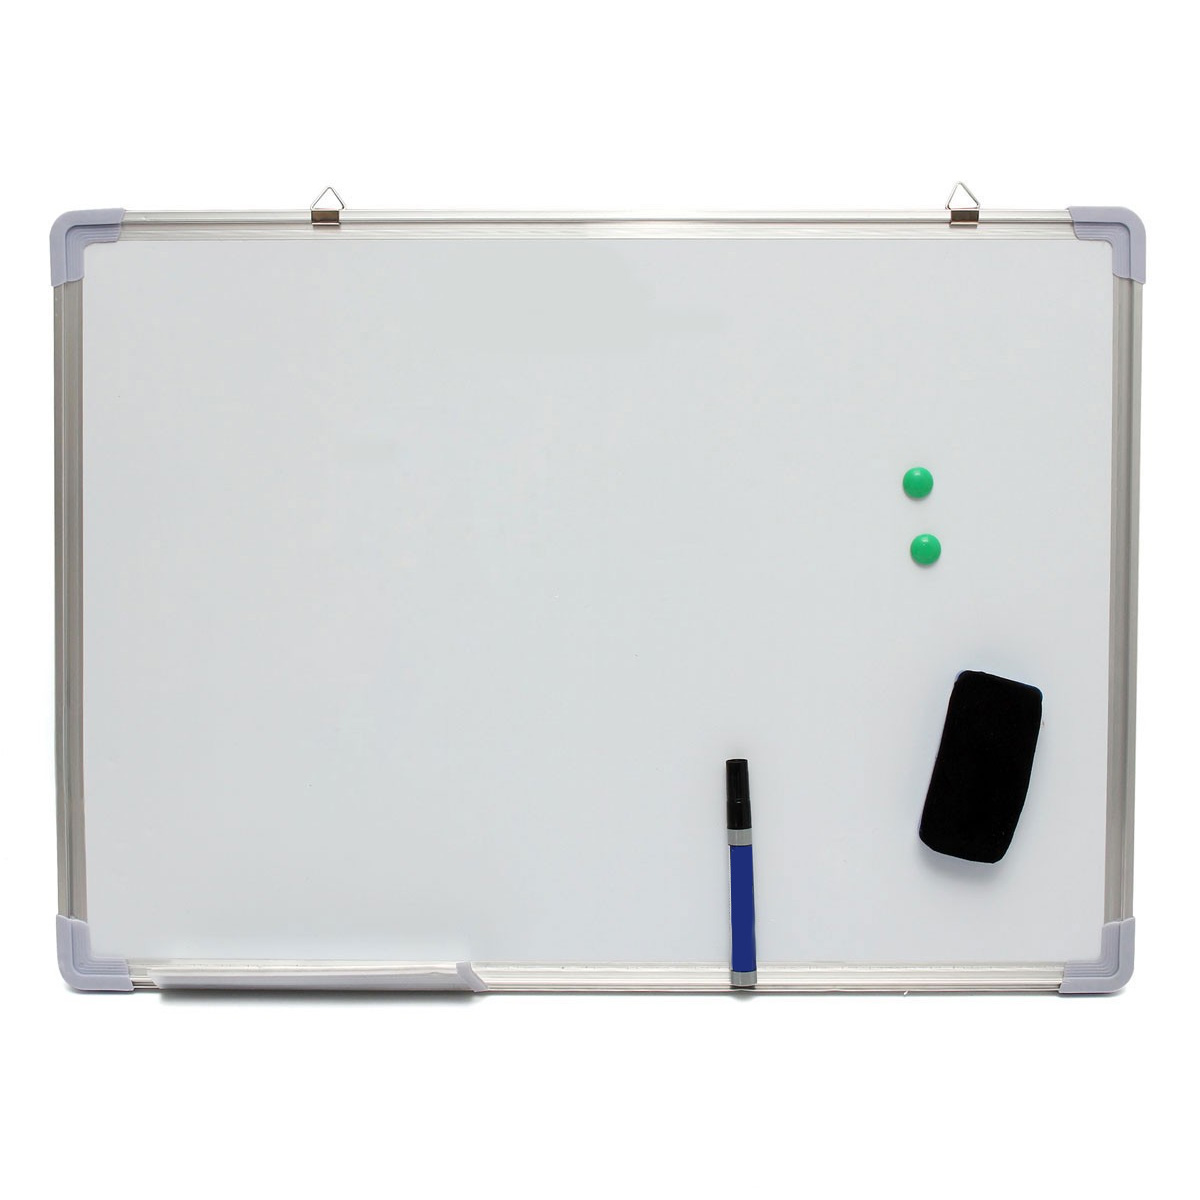 

28x20 Inch Magnetic Dry Erase Whiteboard Writing Notice Board Single Side Office School Message